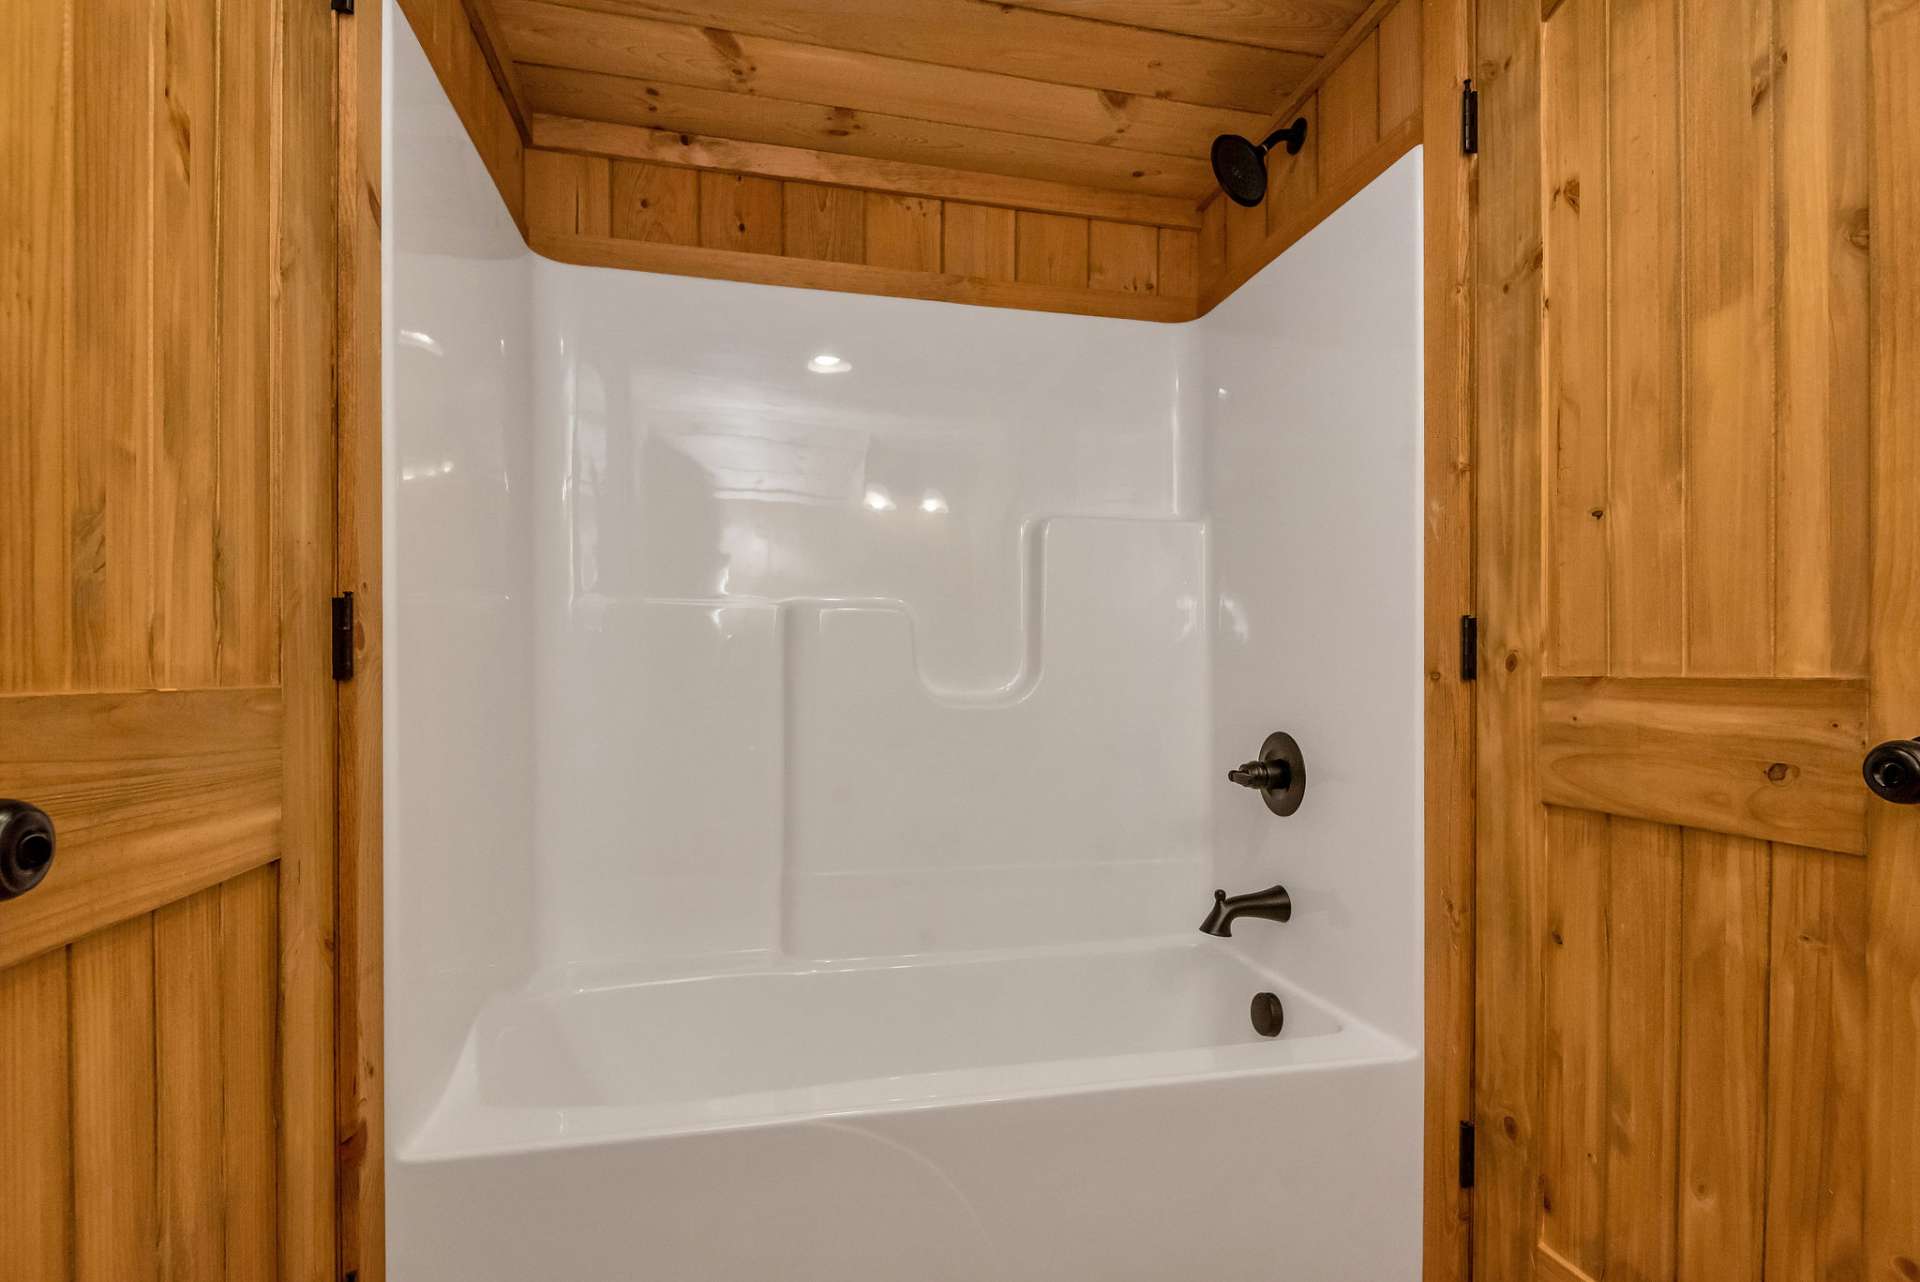 Fiberglass tub/shower combination for comfort and functionality.